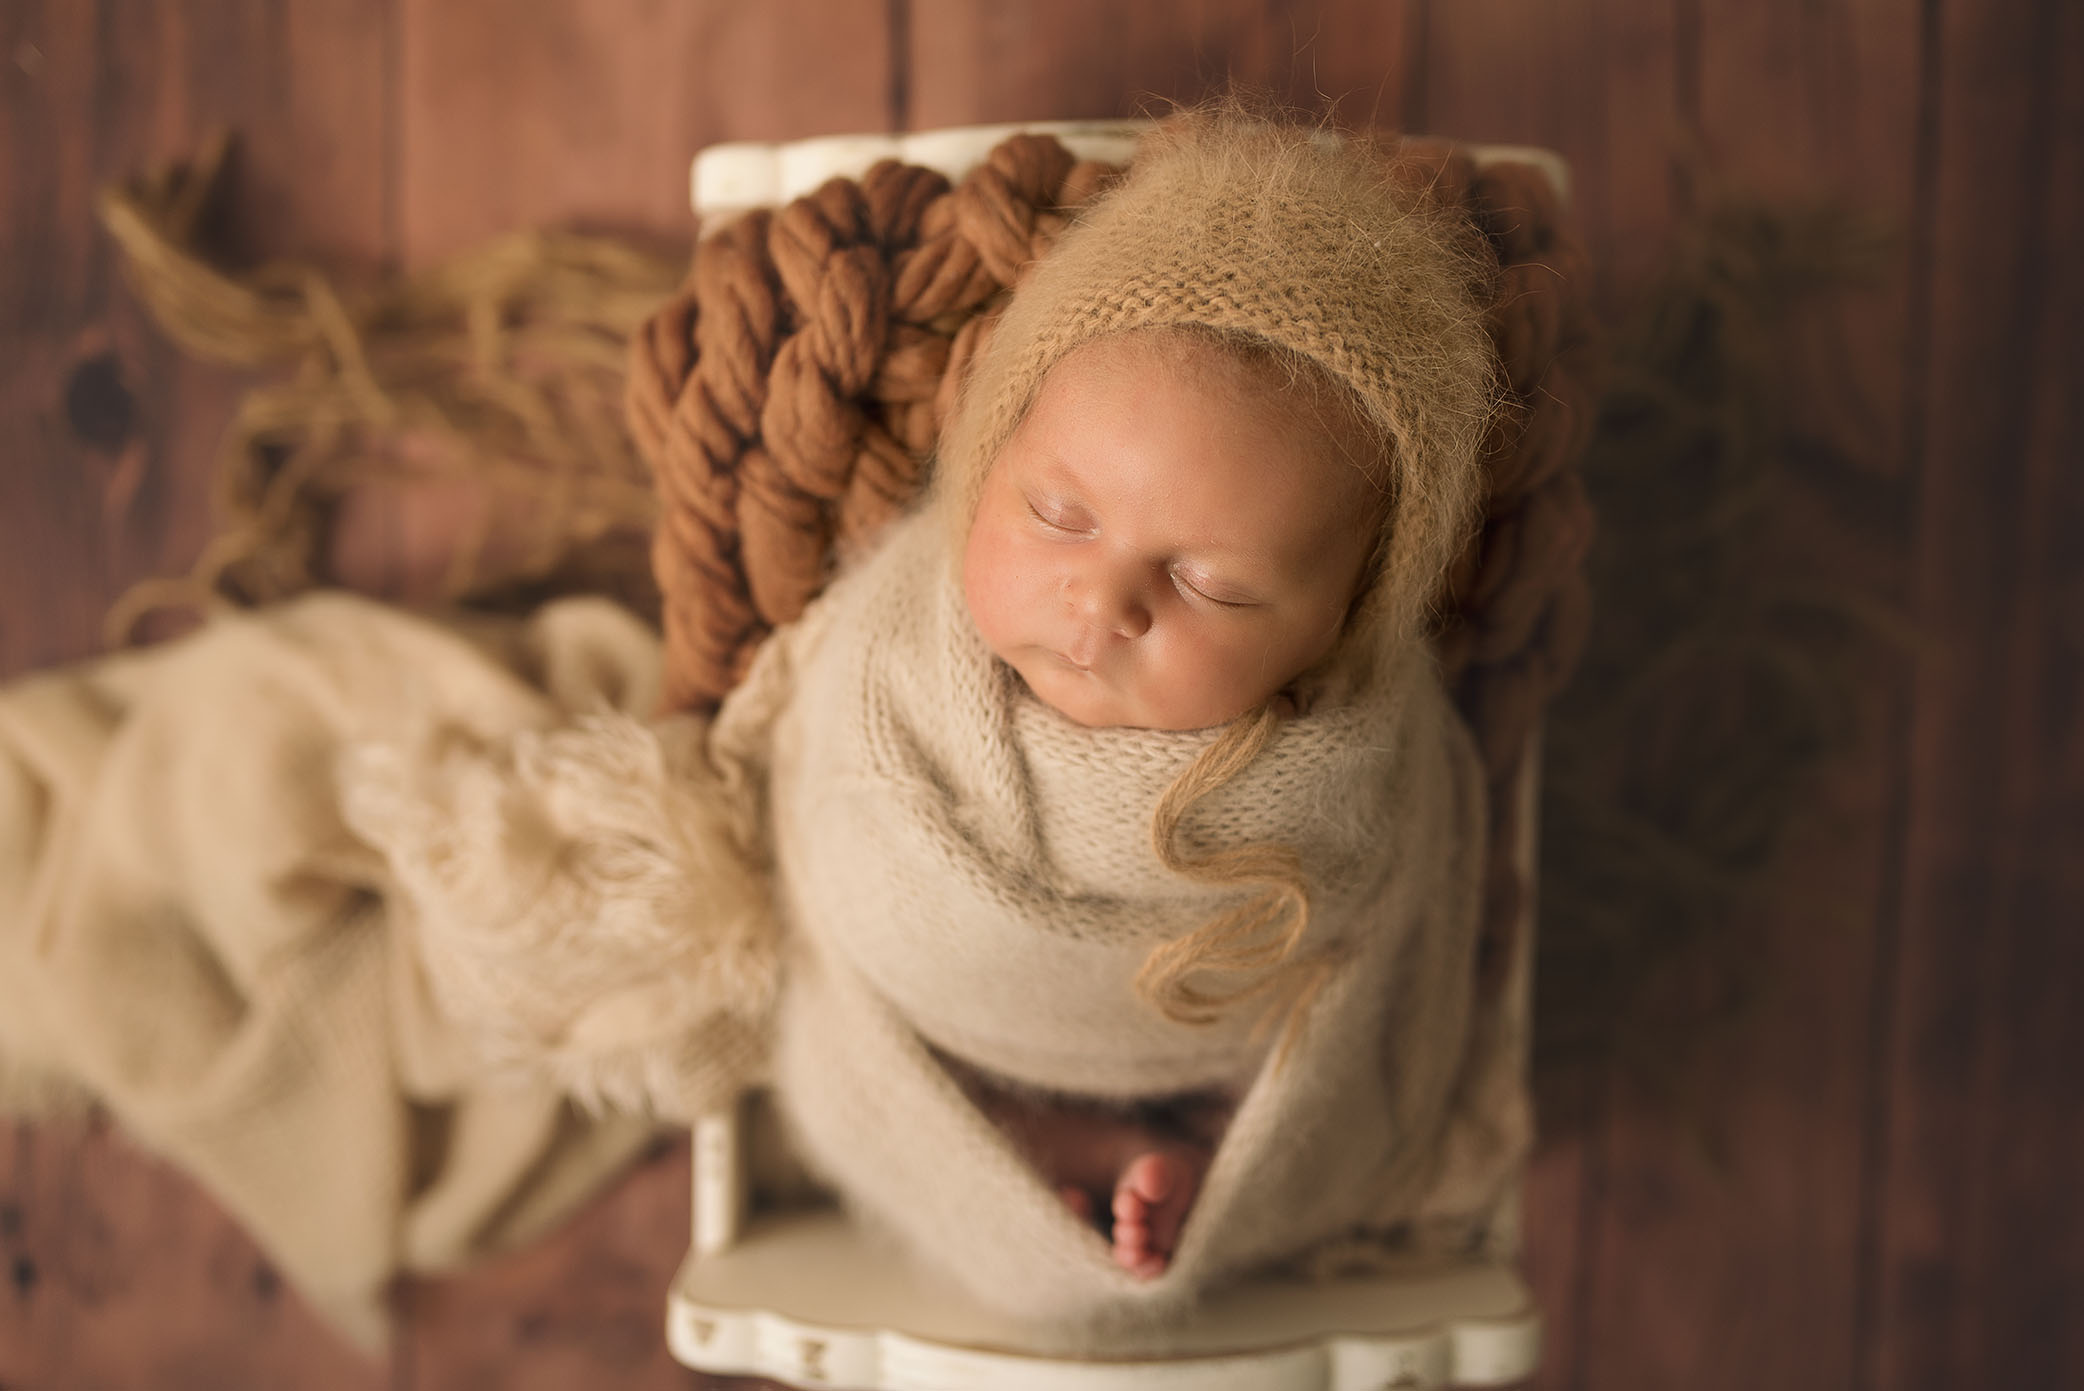 A newborn baby girl sleeps on top of a textured brown blanket. 